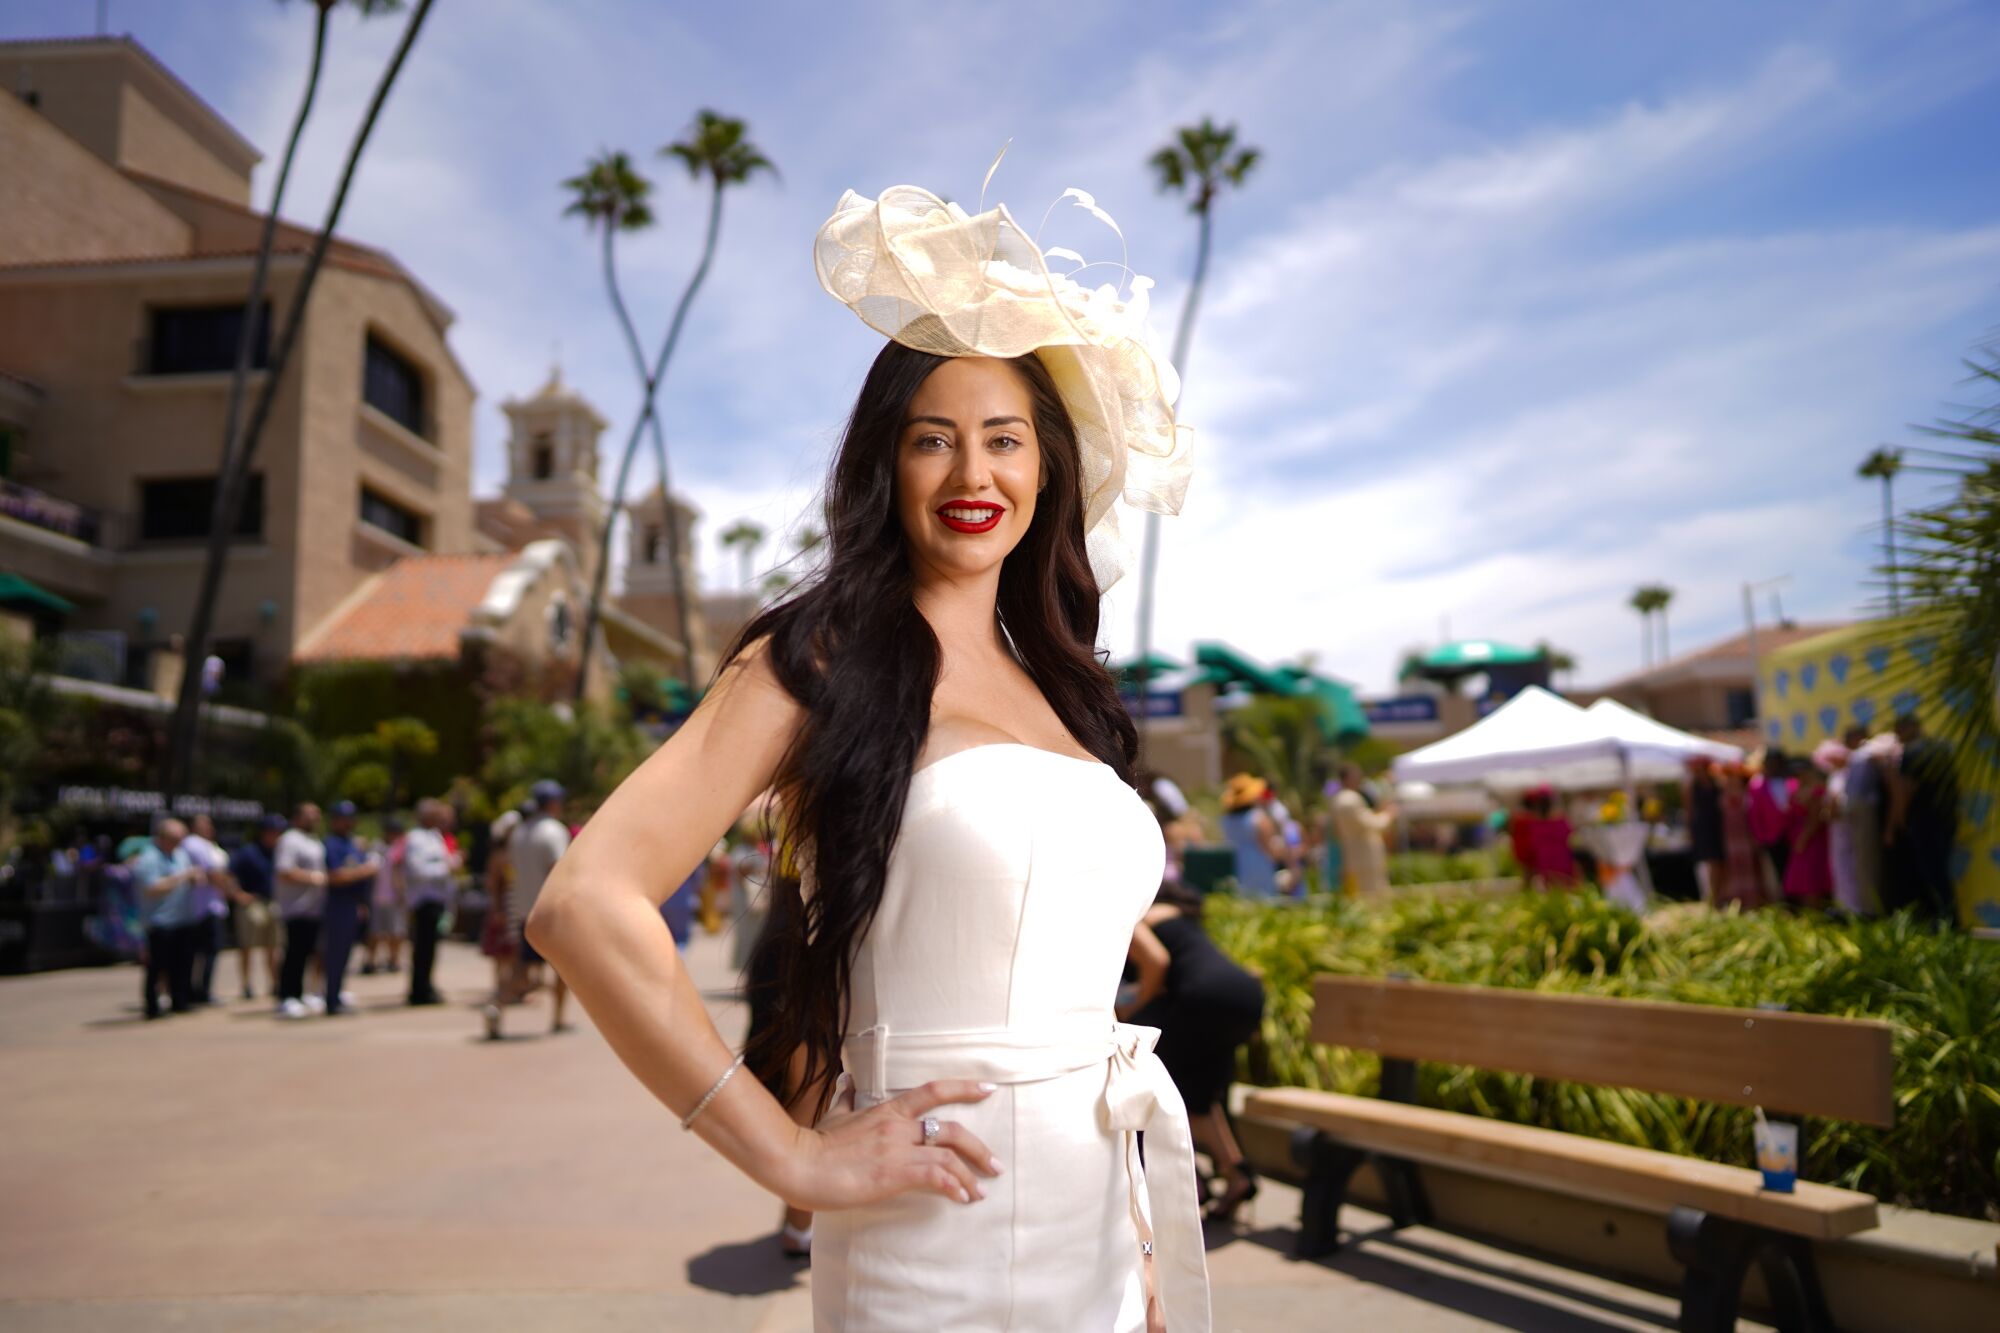 Victoria Zampino from Seal Beach was among the race fans taking part in the tradition of wearing hats.